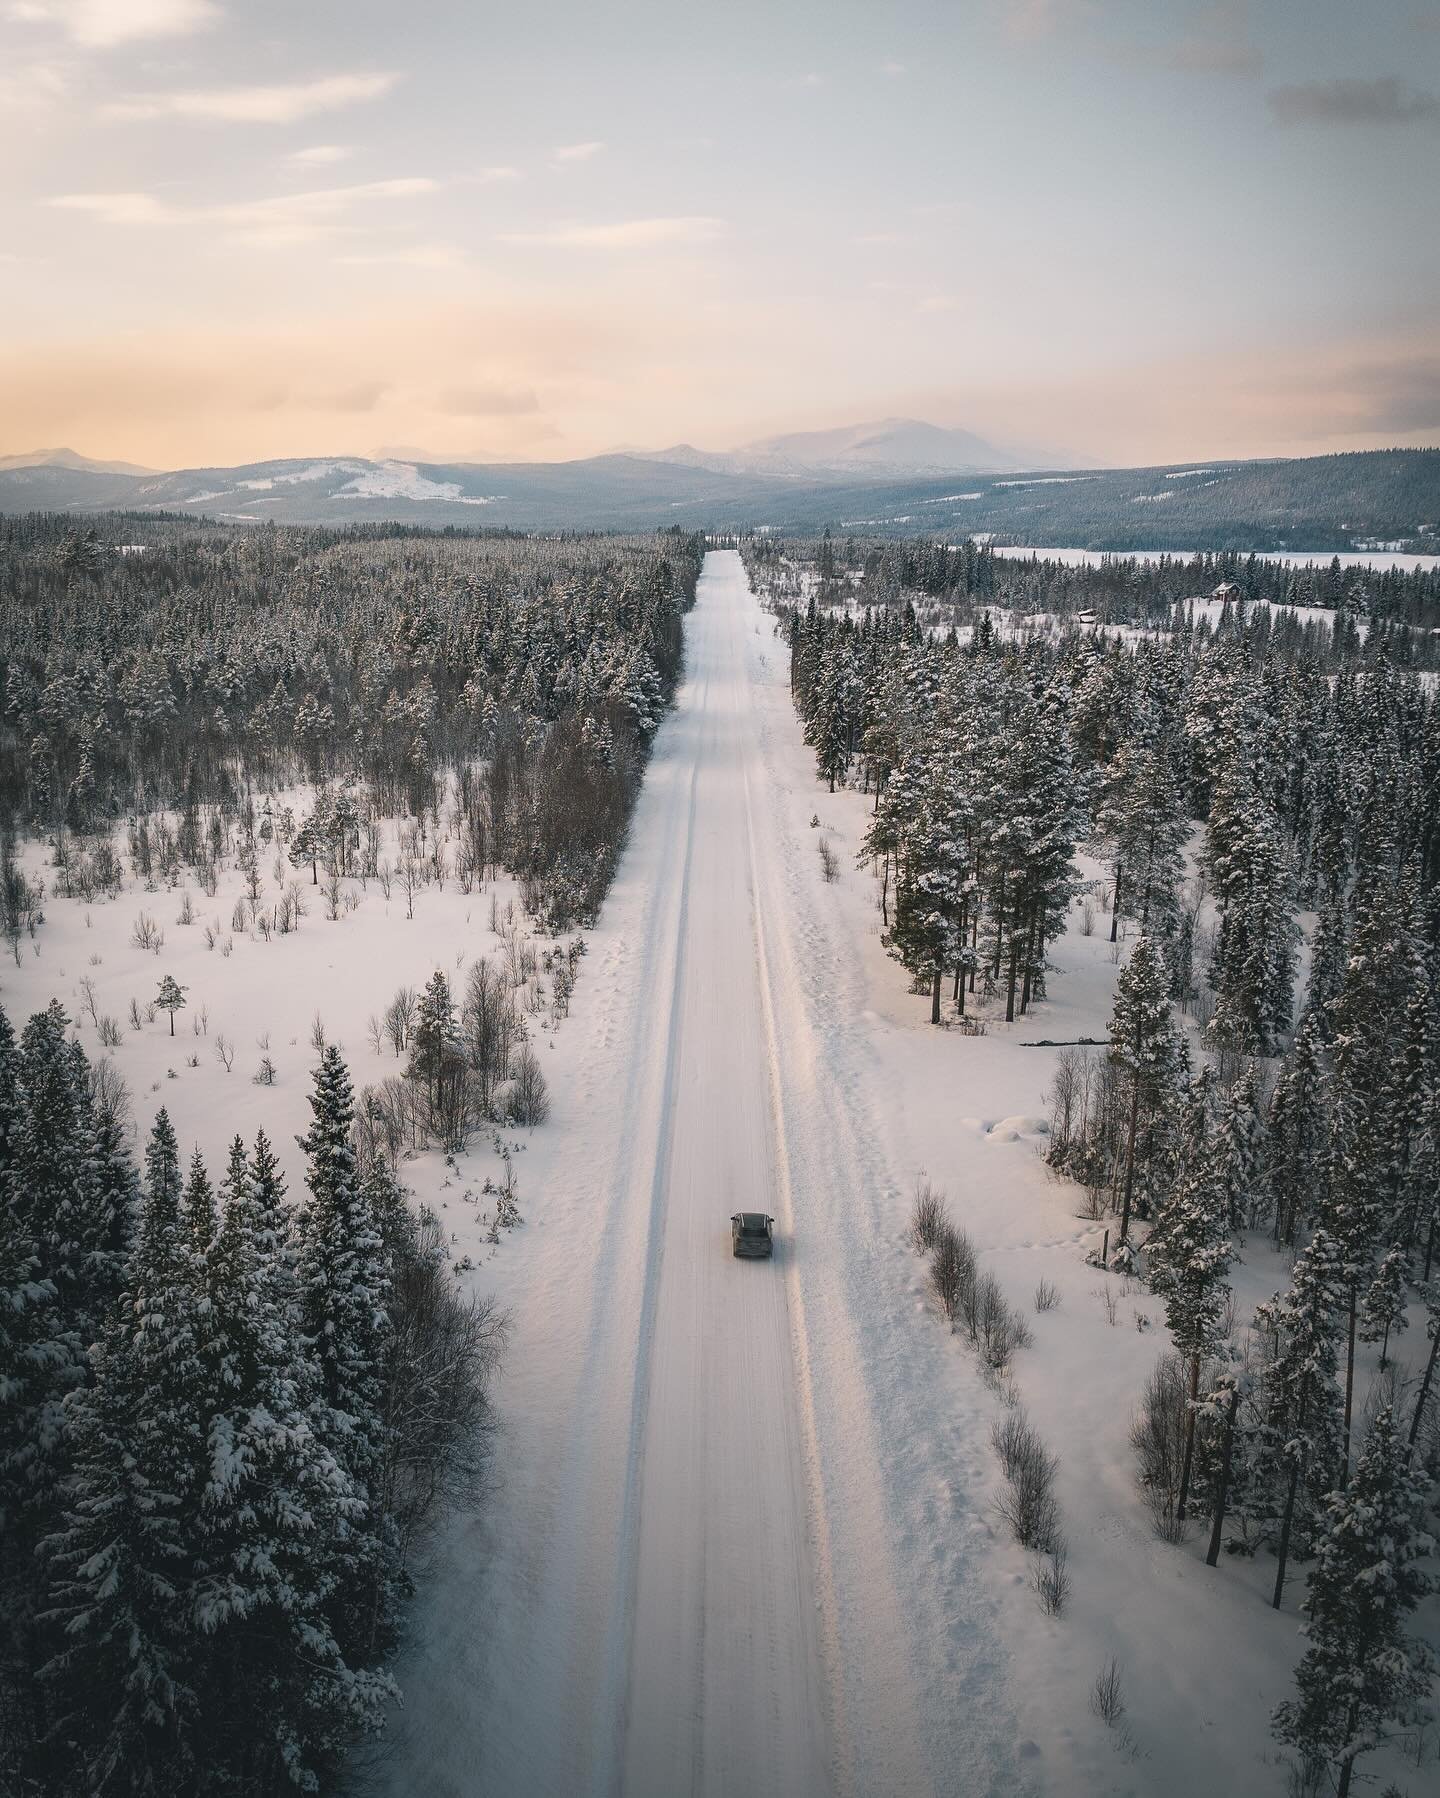 Driving through the beautiful light of Swedish Lapland at day&rsquo;s end. 
.
.
.
#landscape_captures #dronephotography #djiglobal_official #swedishlapland #lapland #winterwonderland #exploretocreate